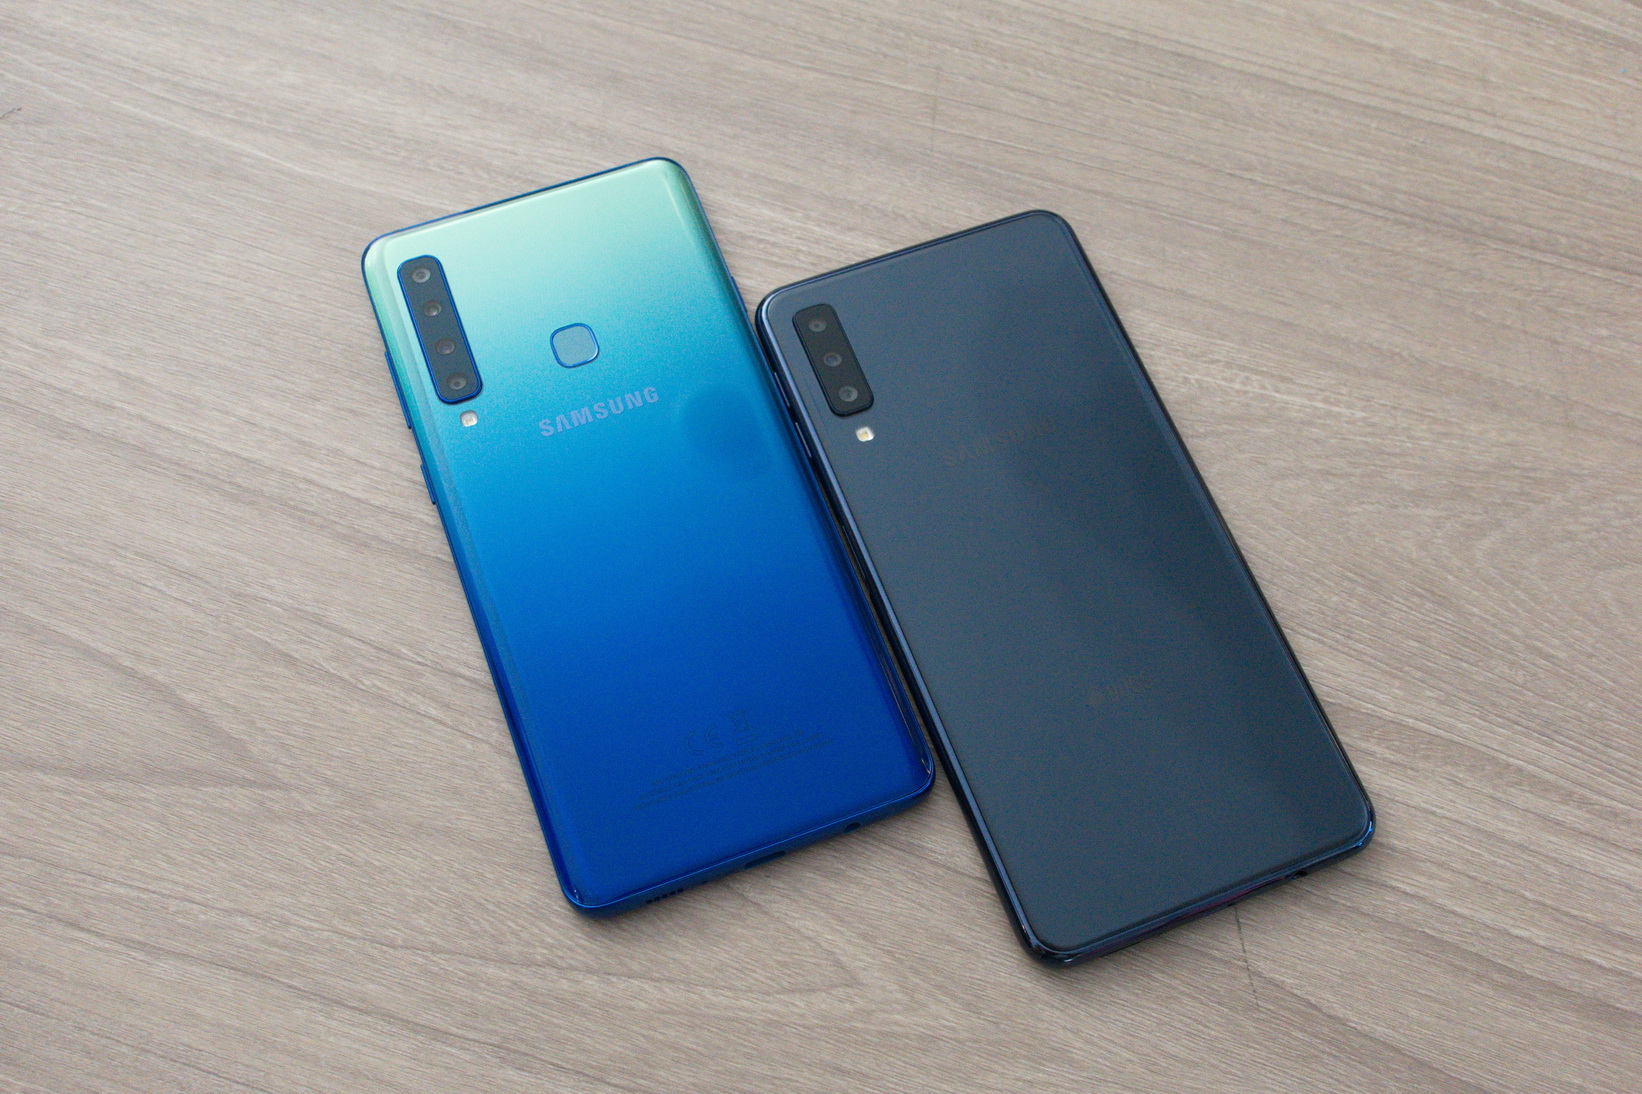 Samsung goes camera crazy with the Galaxy A9 and A7